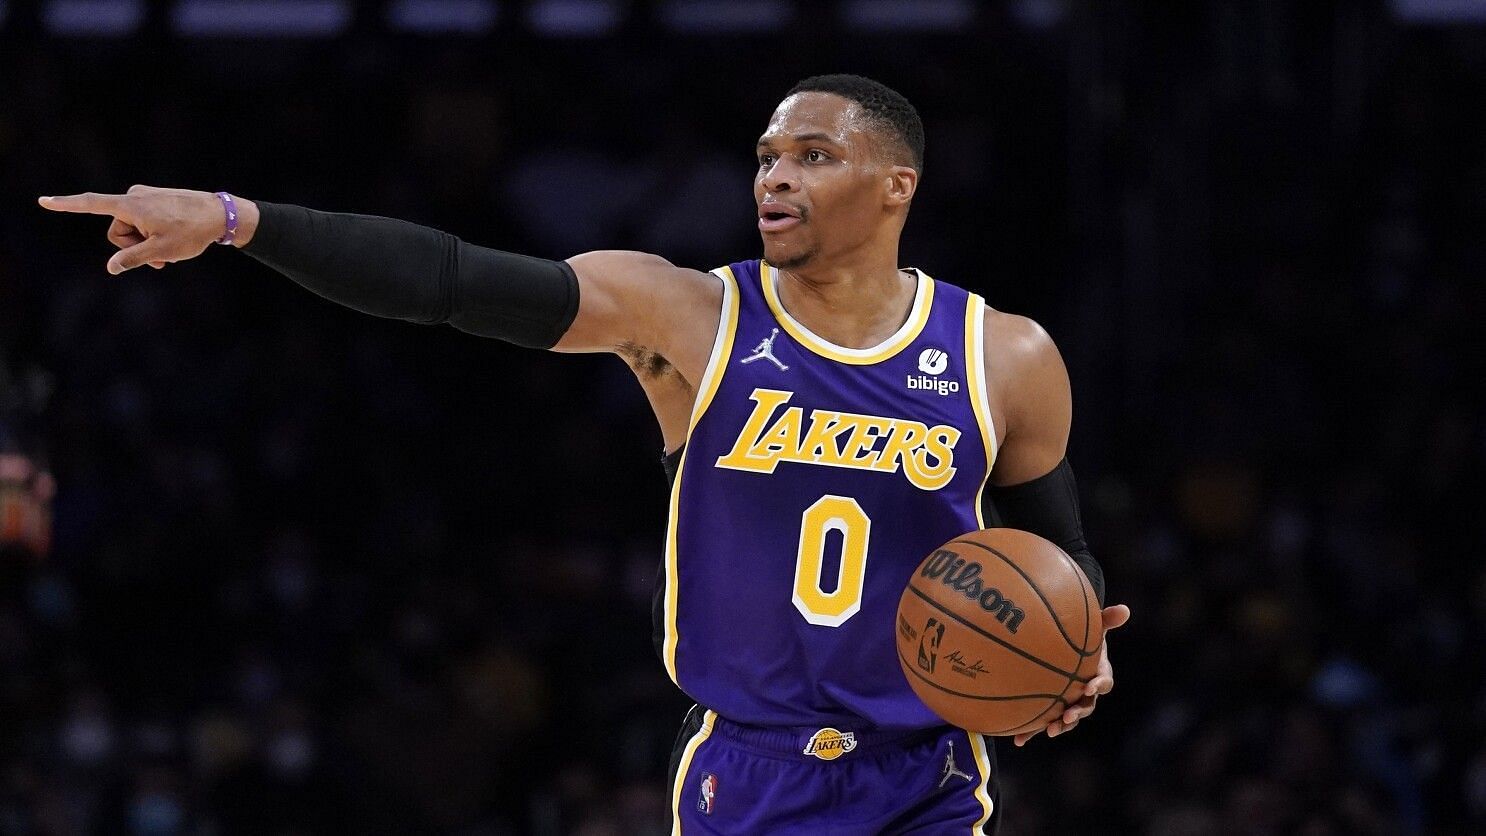 Russell Westbrook looks set to take his player option and earn $47 million next season with the LA Lakers. [Photo: Los Angeles Times]